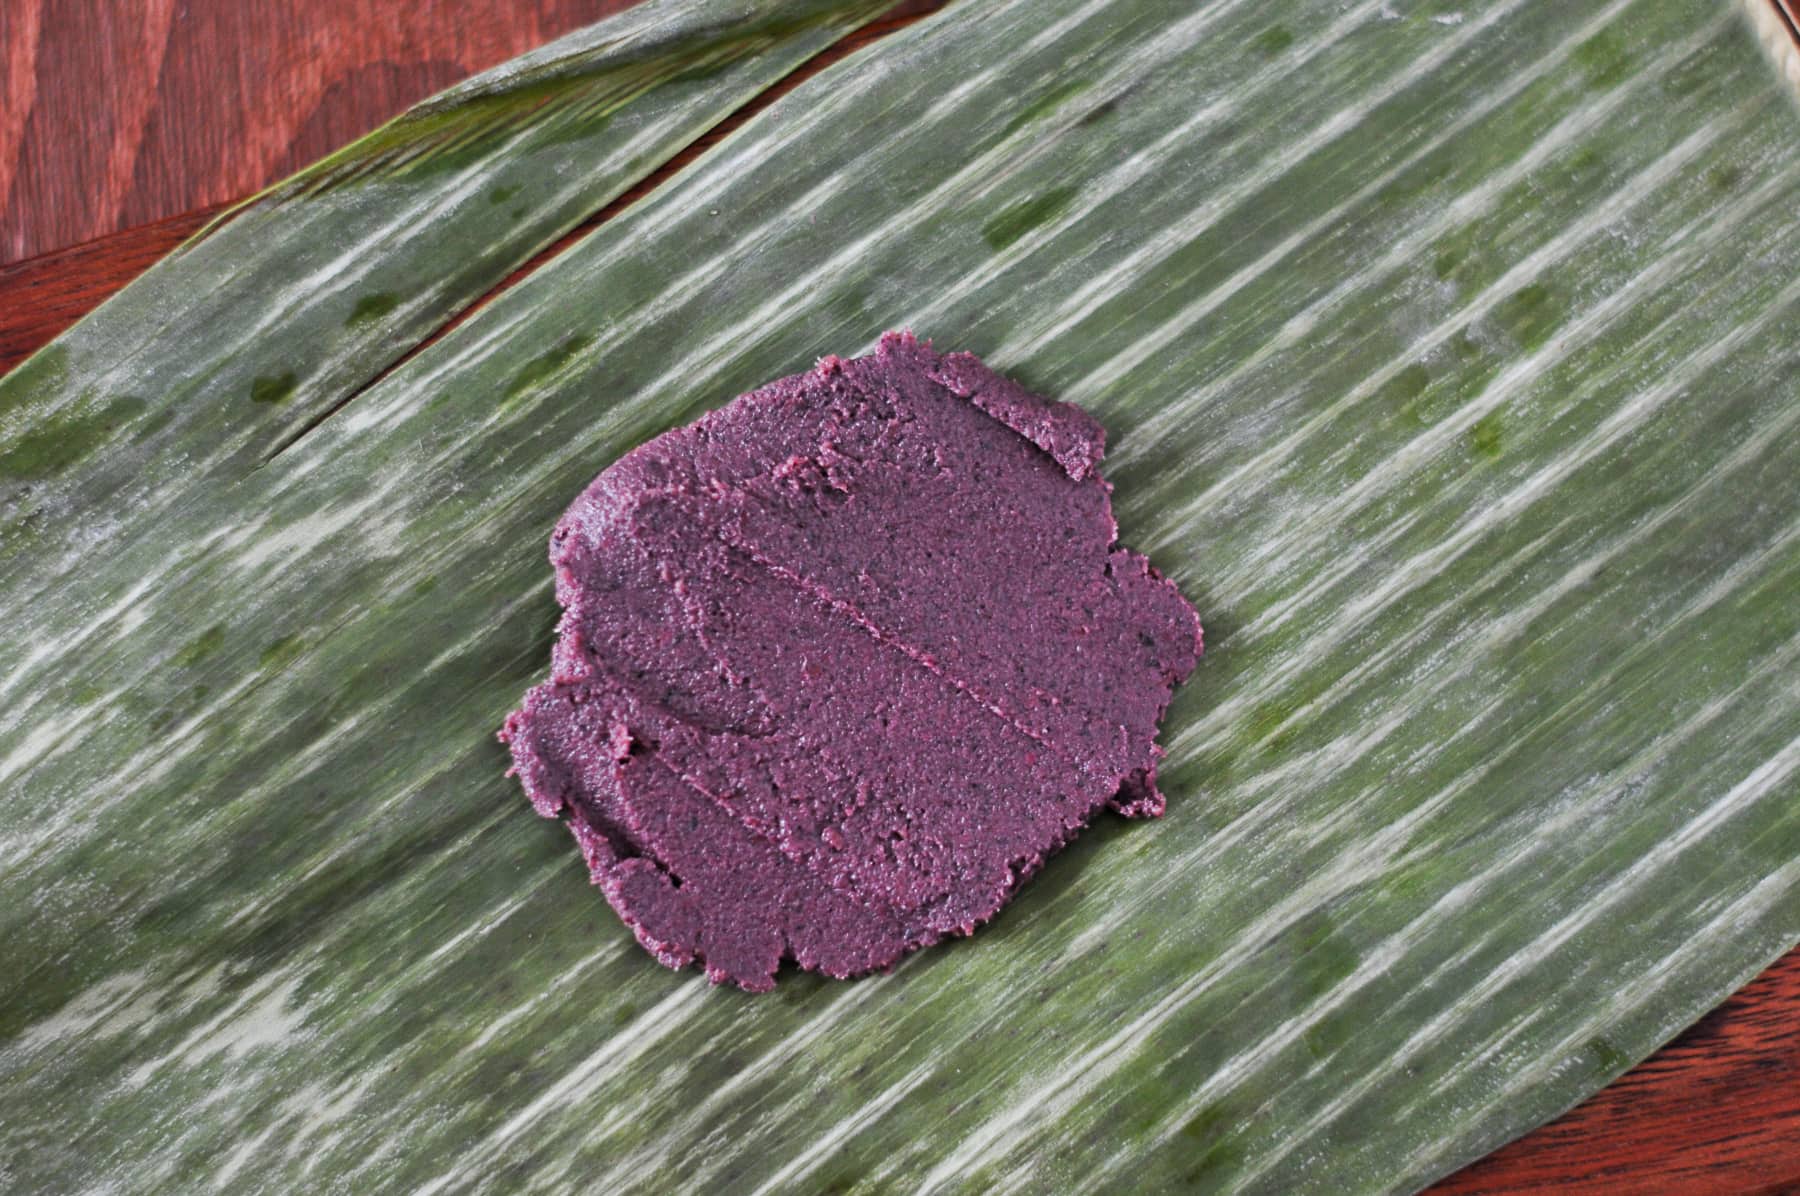 Roast the shrimp paste by placing it in a banana leaf and cooking at 350 degrees for 10 minutes